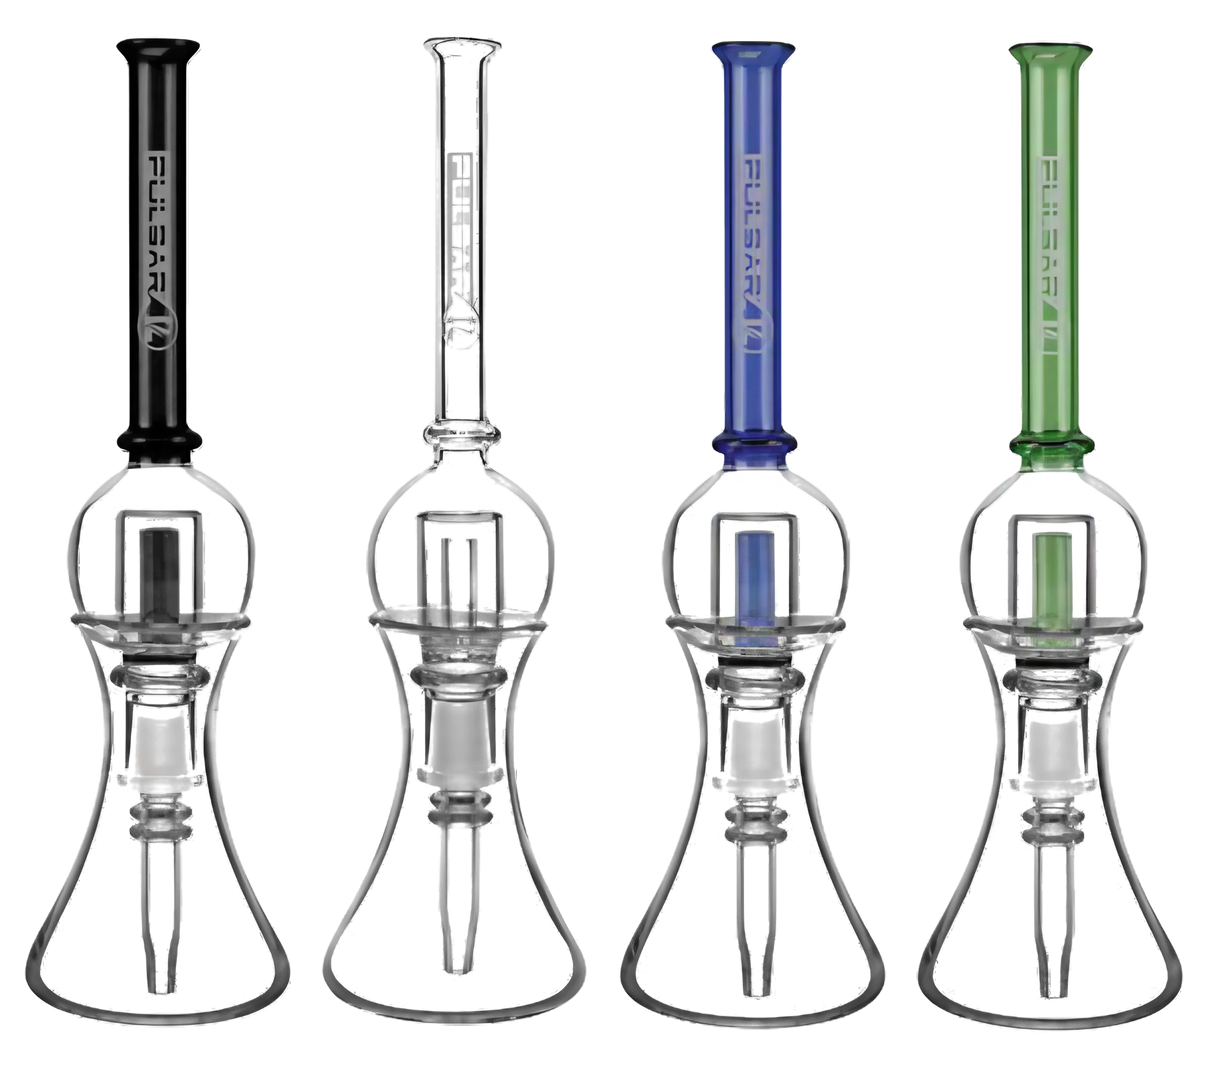 Pulsar Bubble Vapor Vessels with Quartz Tips & Stands in black, clear, blue, and green